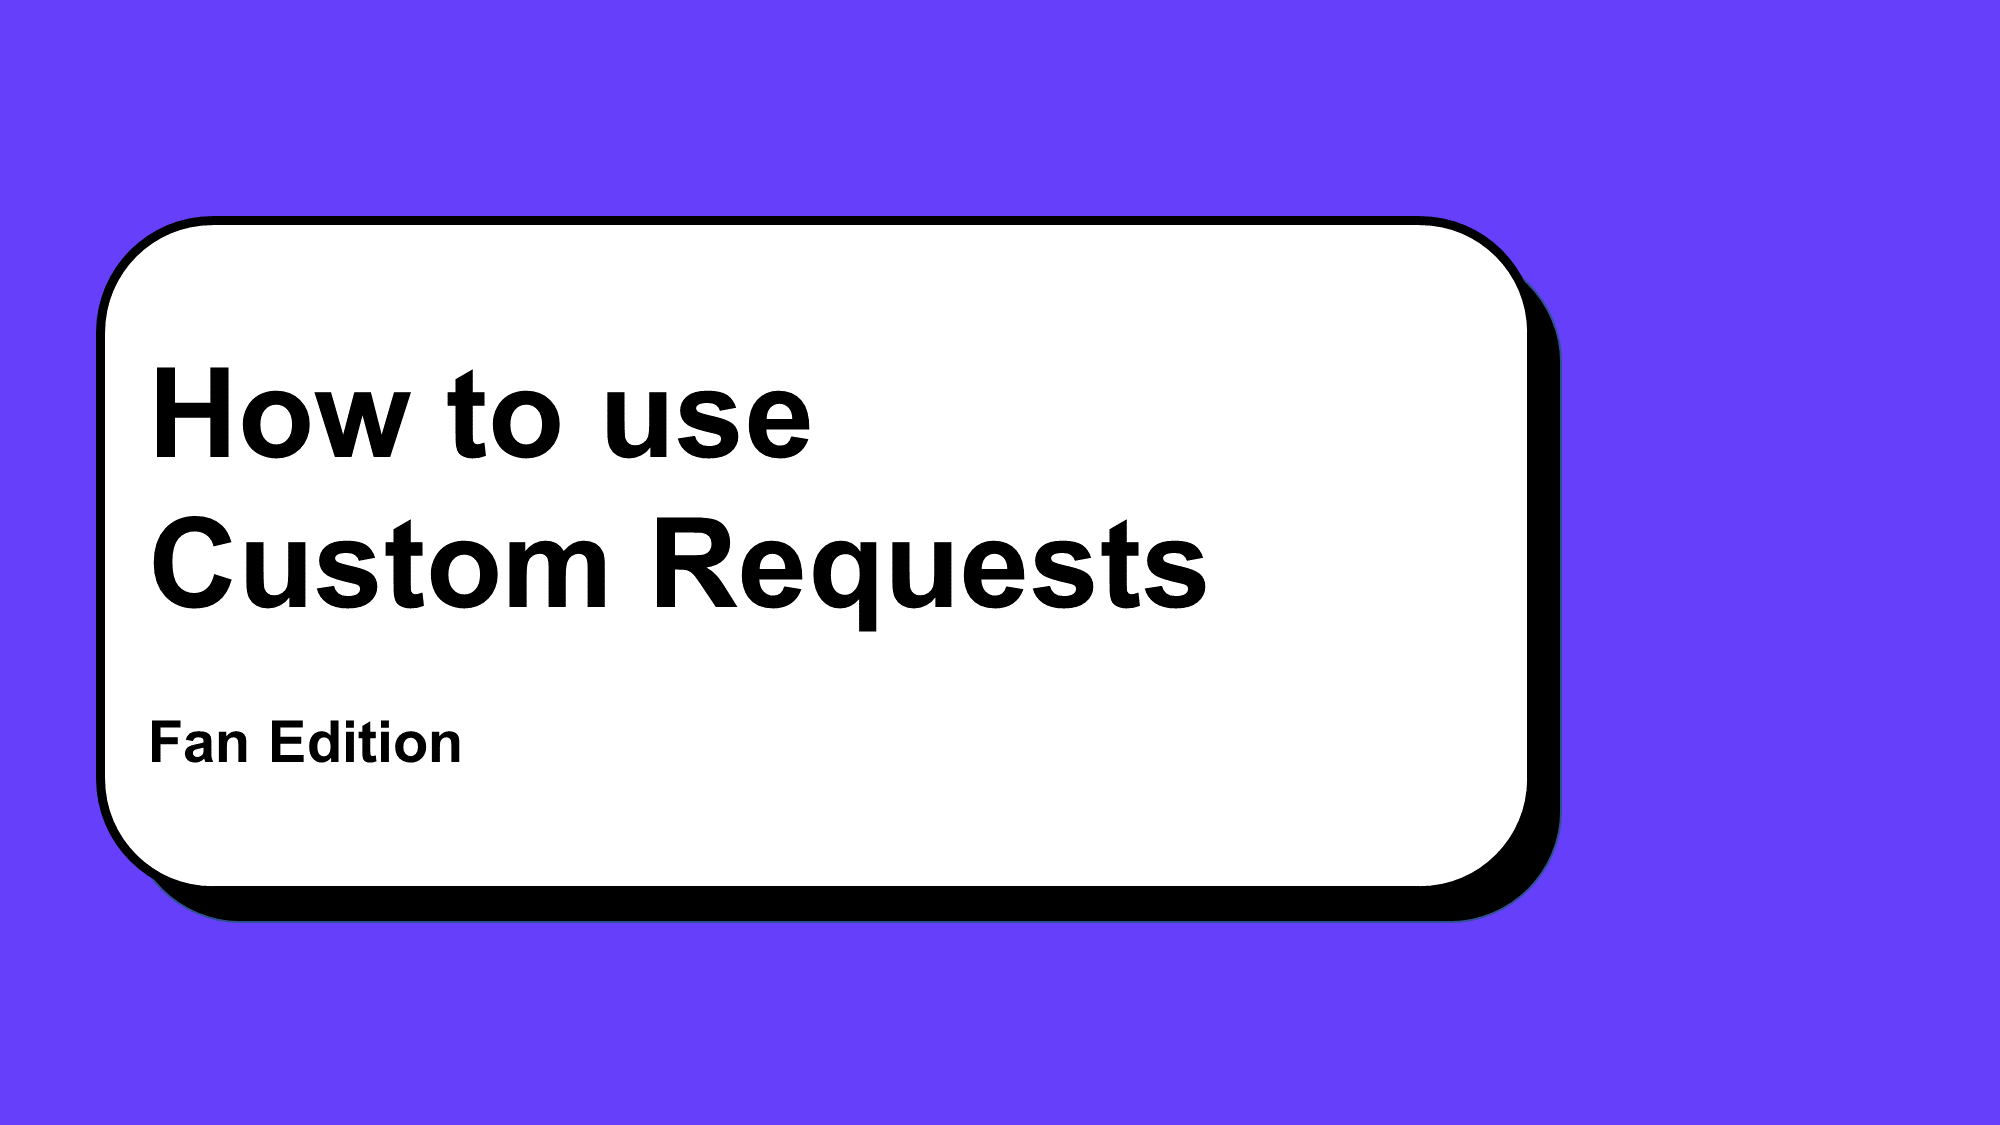 How to use Custom Requests (Fan Edition)